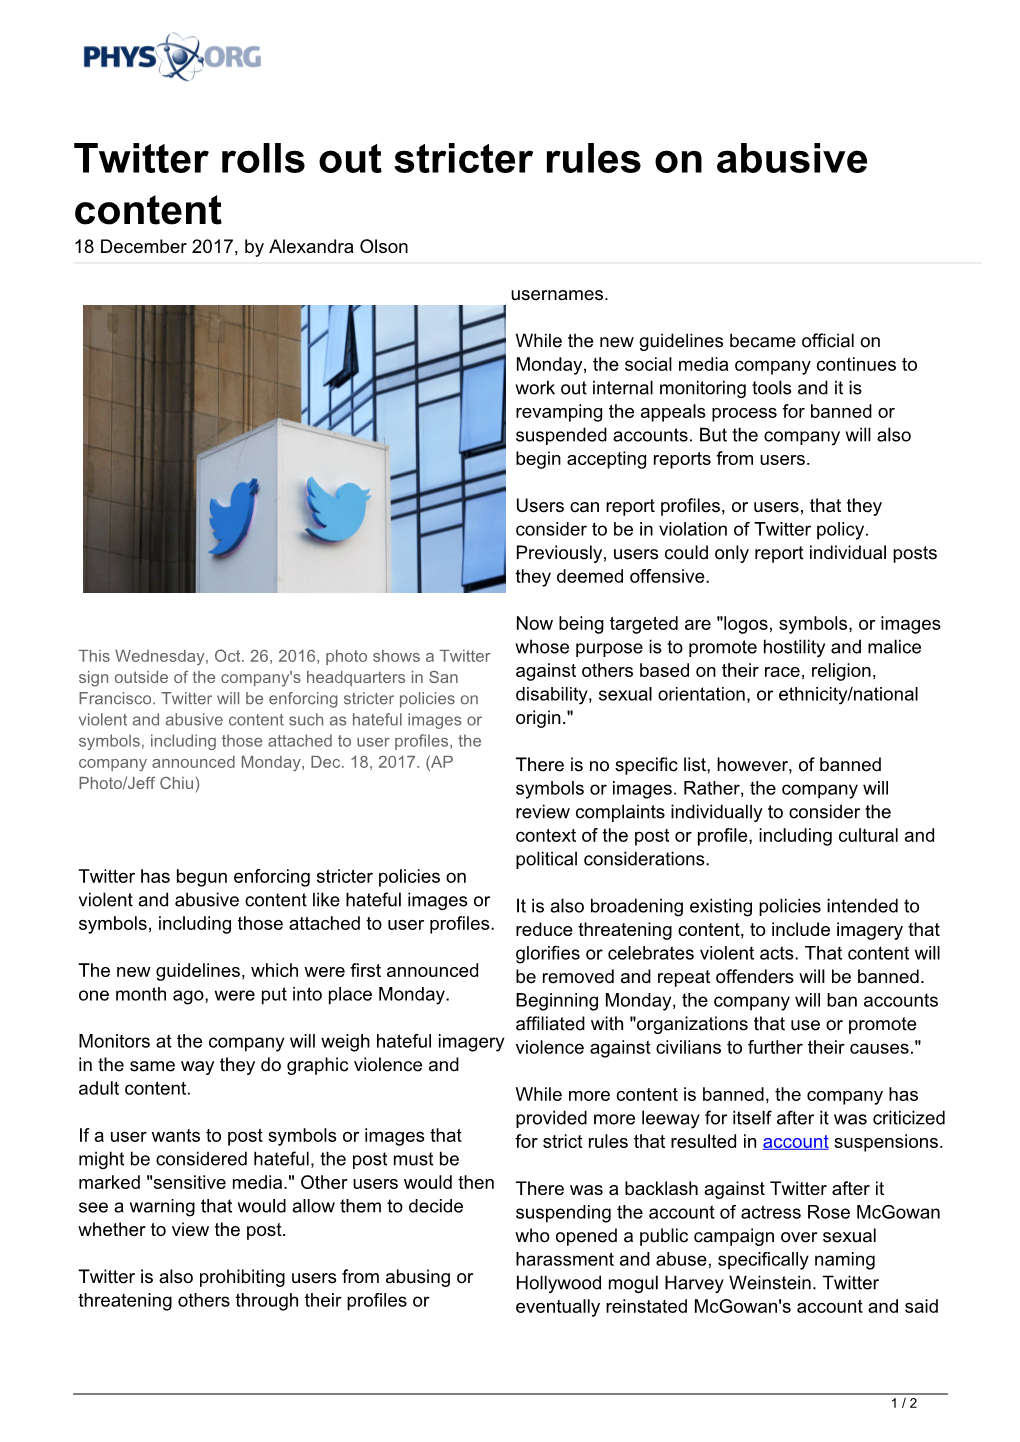 Twitter Rolls out Stricter Rules on Abusive Content 18 December 2017, by Alexandra Olson